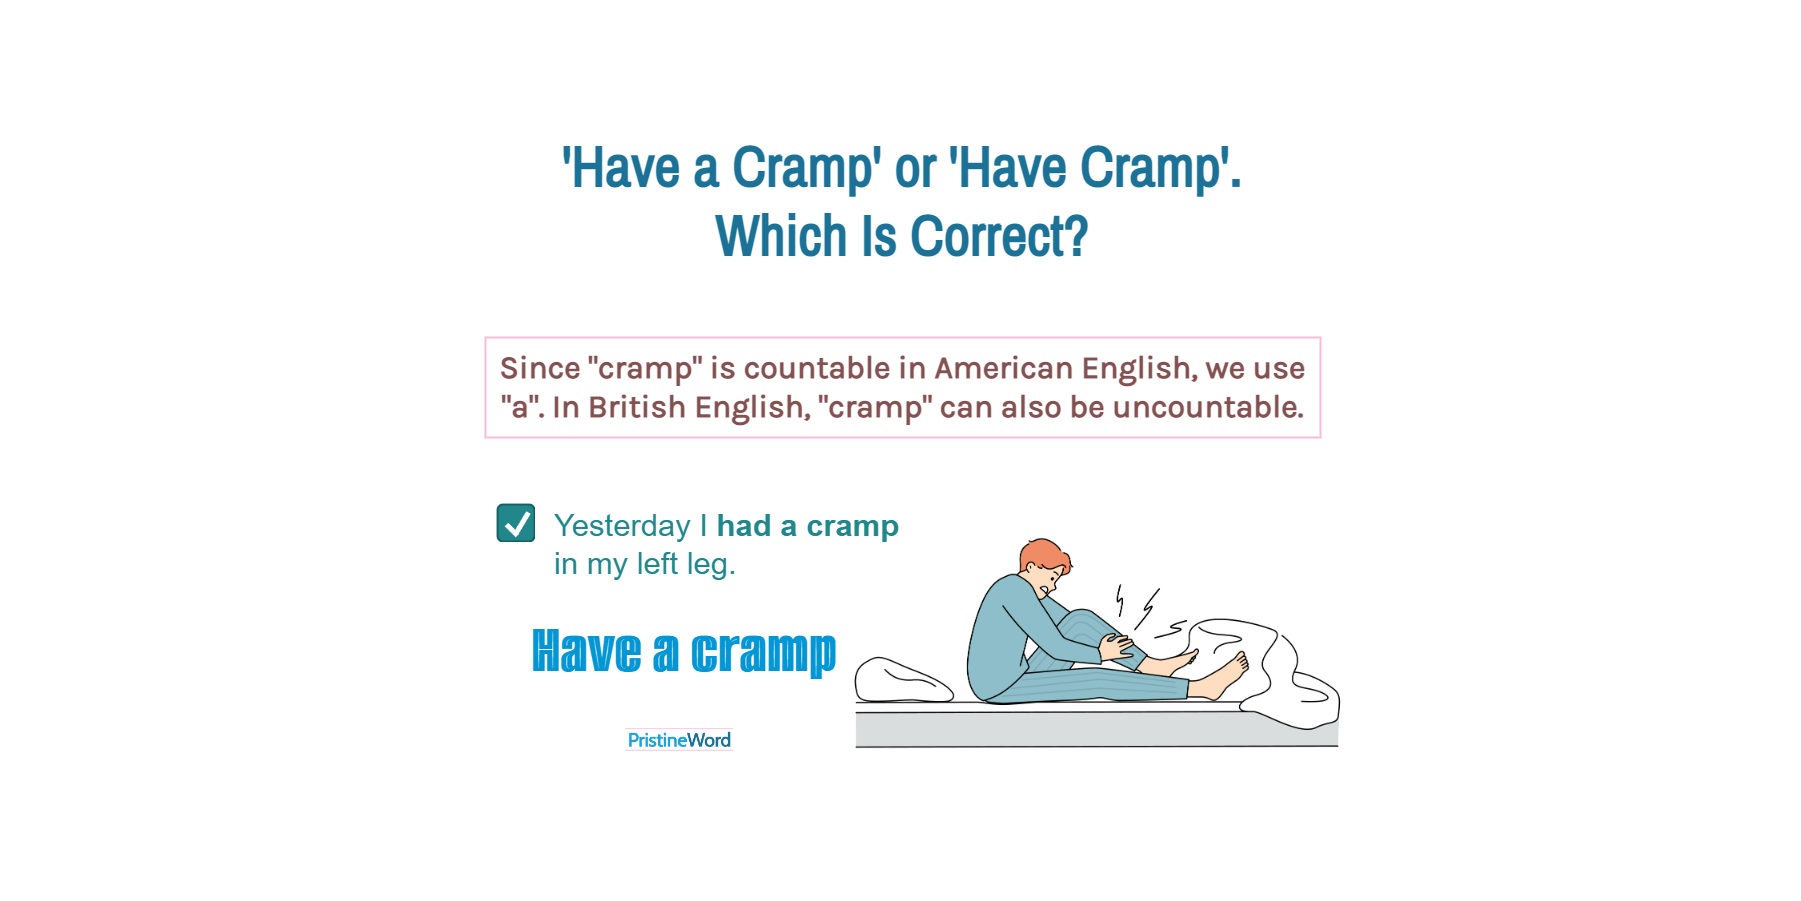 Have a Cramp or Have Cramp. Which Is Correct?